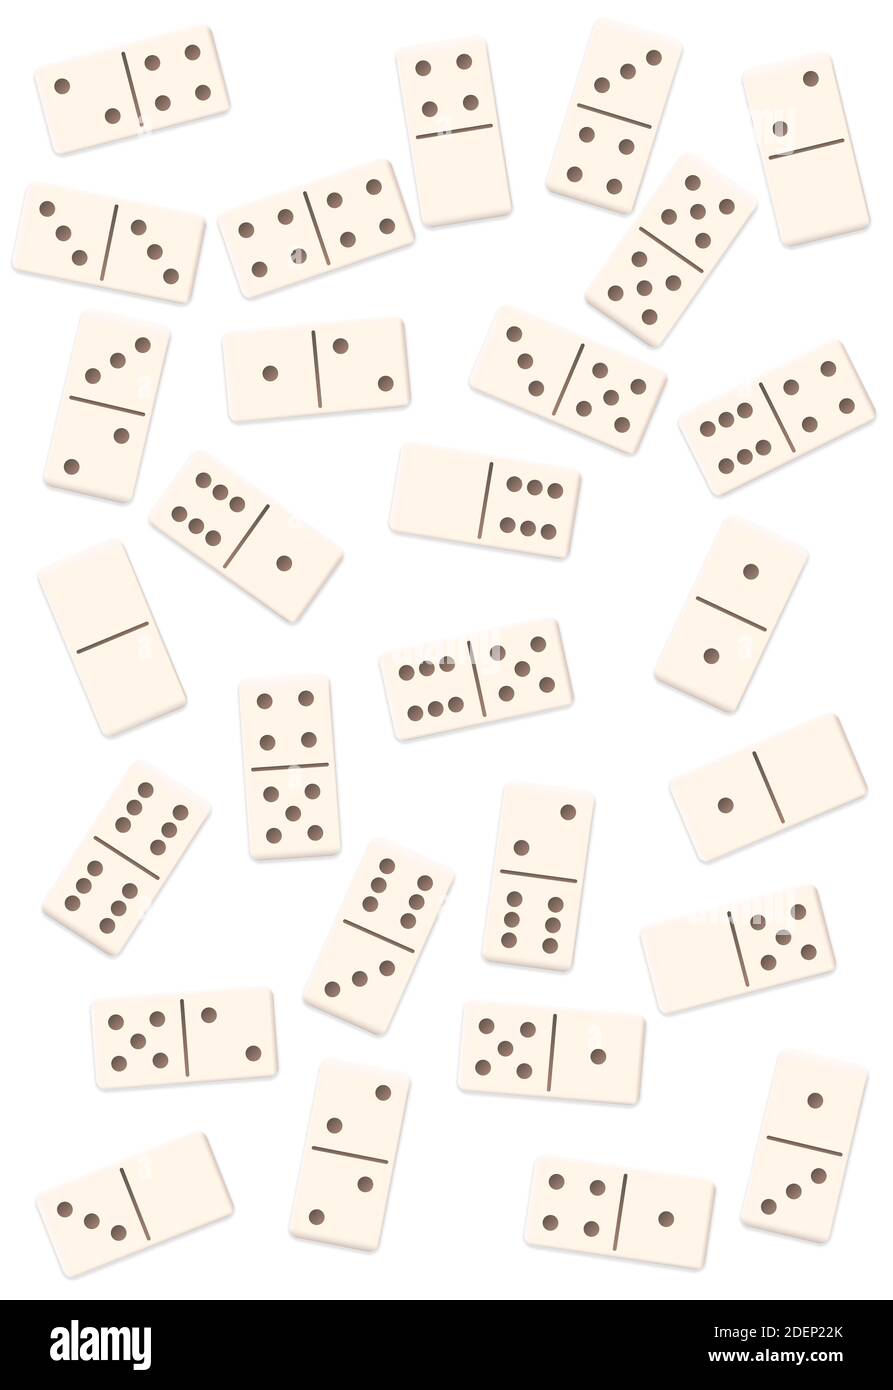 Scattered dominos, shuffled, mixed up, loosely arranged messy set of 28 white tiles - illustration on white background. Stock Photo